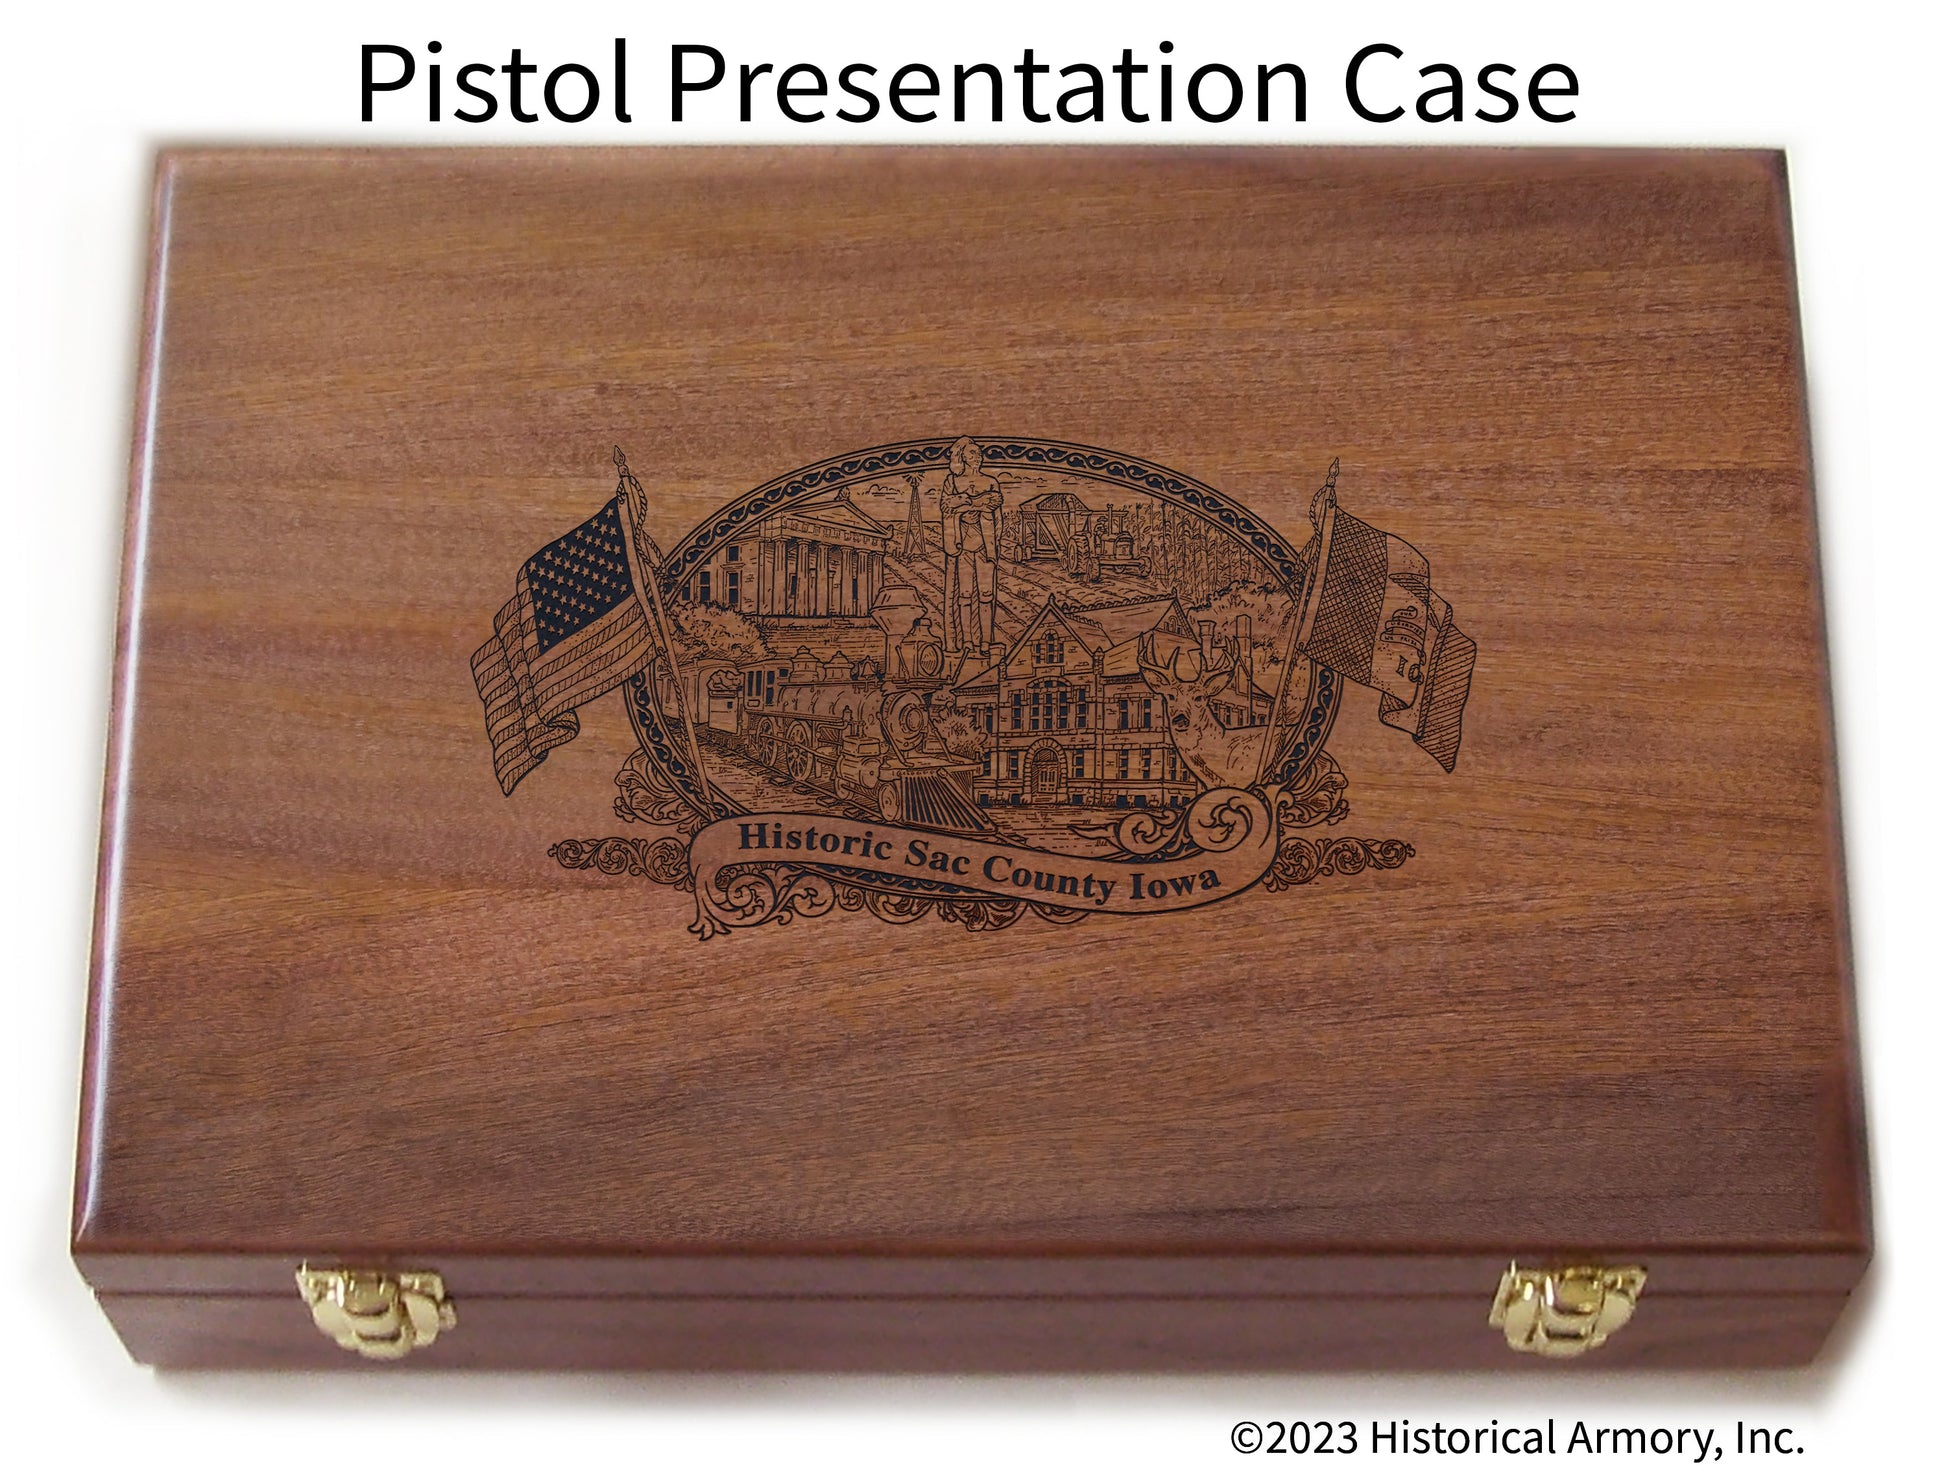 Sac County Iowa Engraved .45 Auto Ruger 1911 Presentation Case